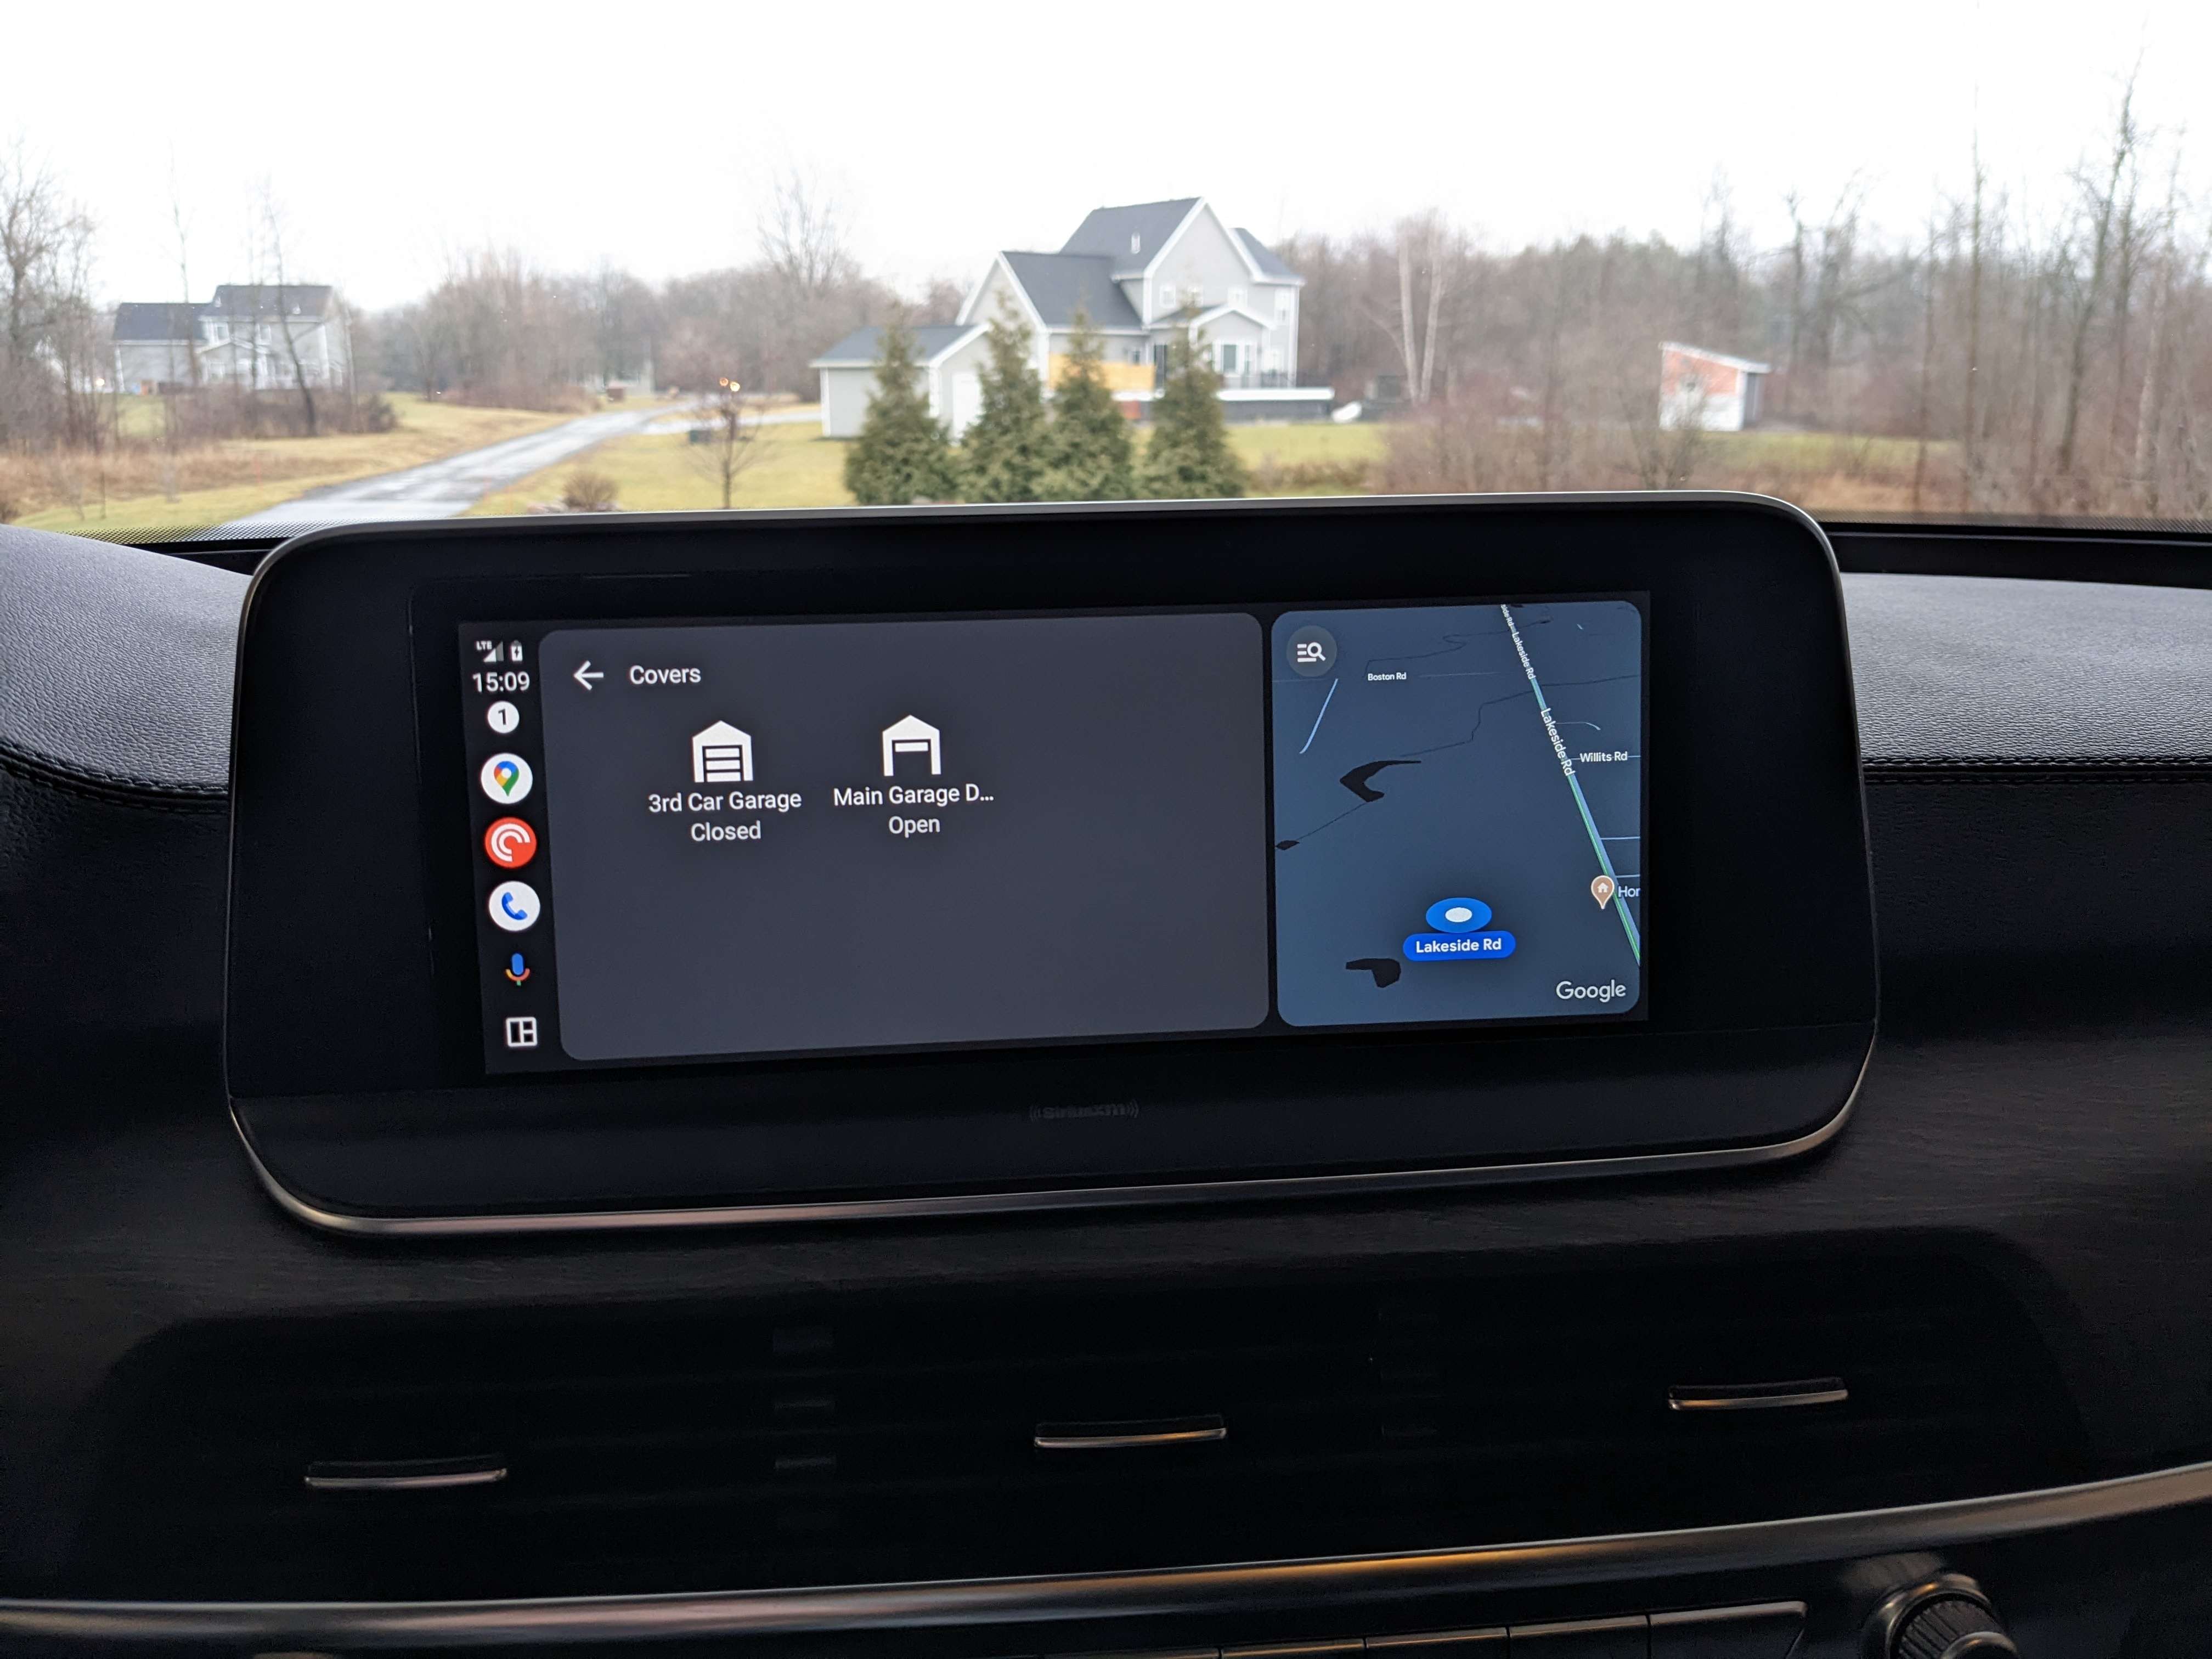 Android Auto vs Alexa Auto Mode: What's the Difference?